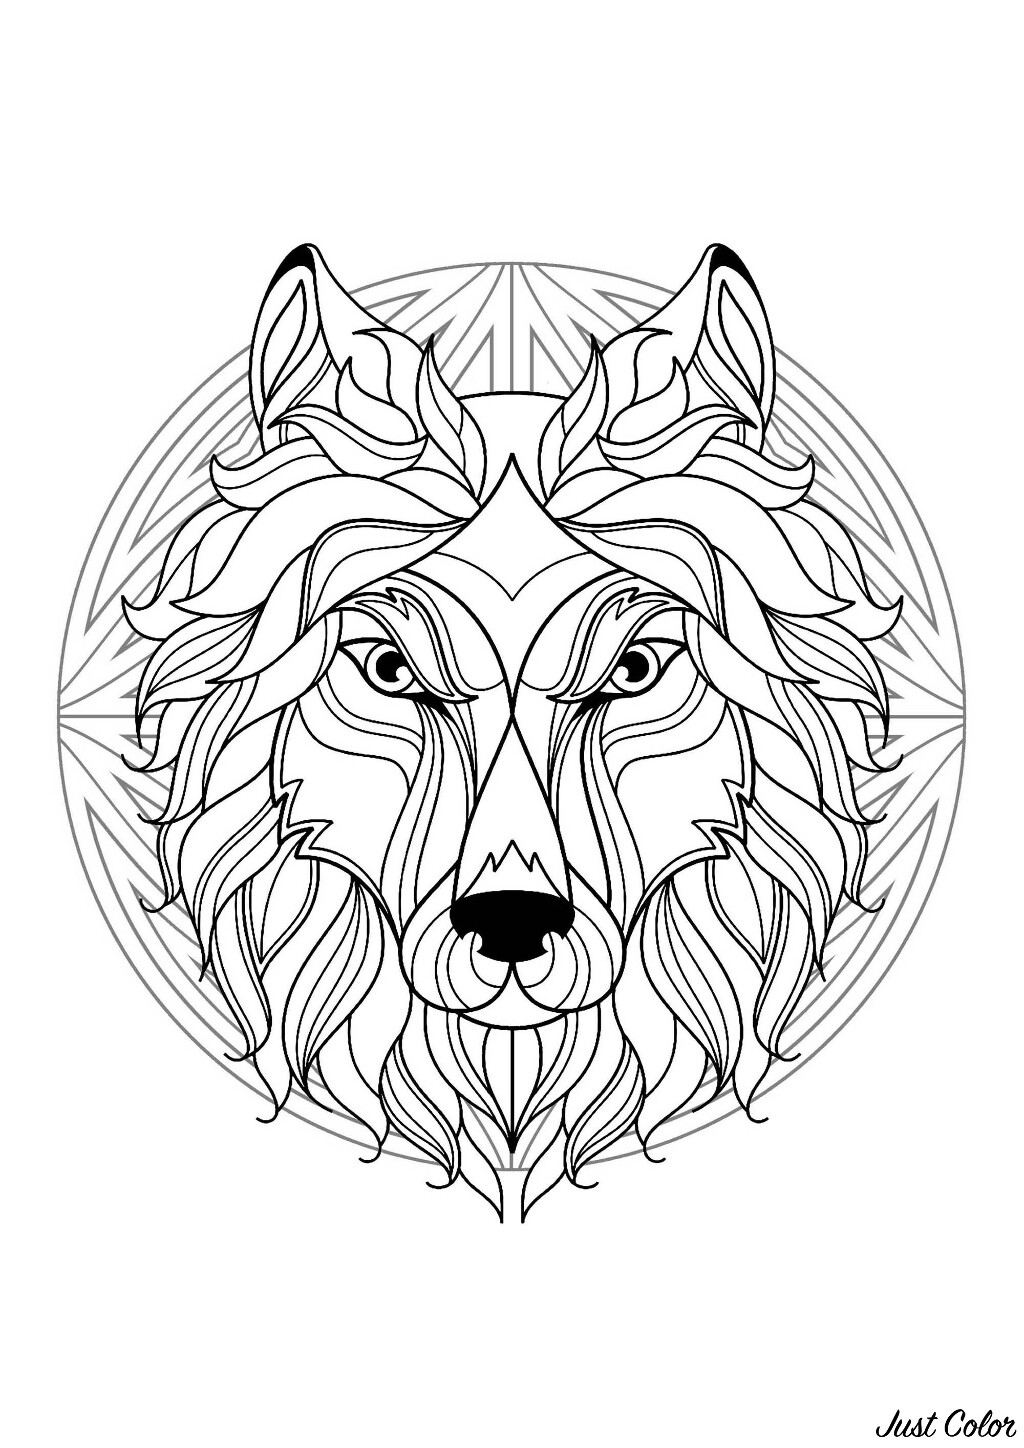 Mandala to color with magnificent Wolf head and simple patterns in background